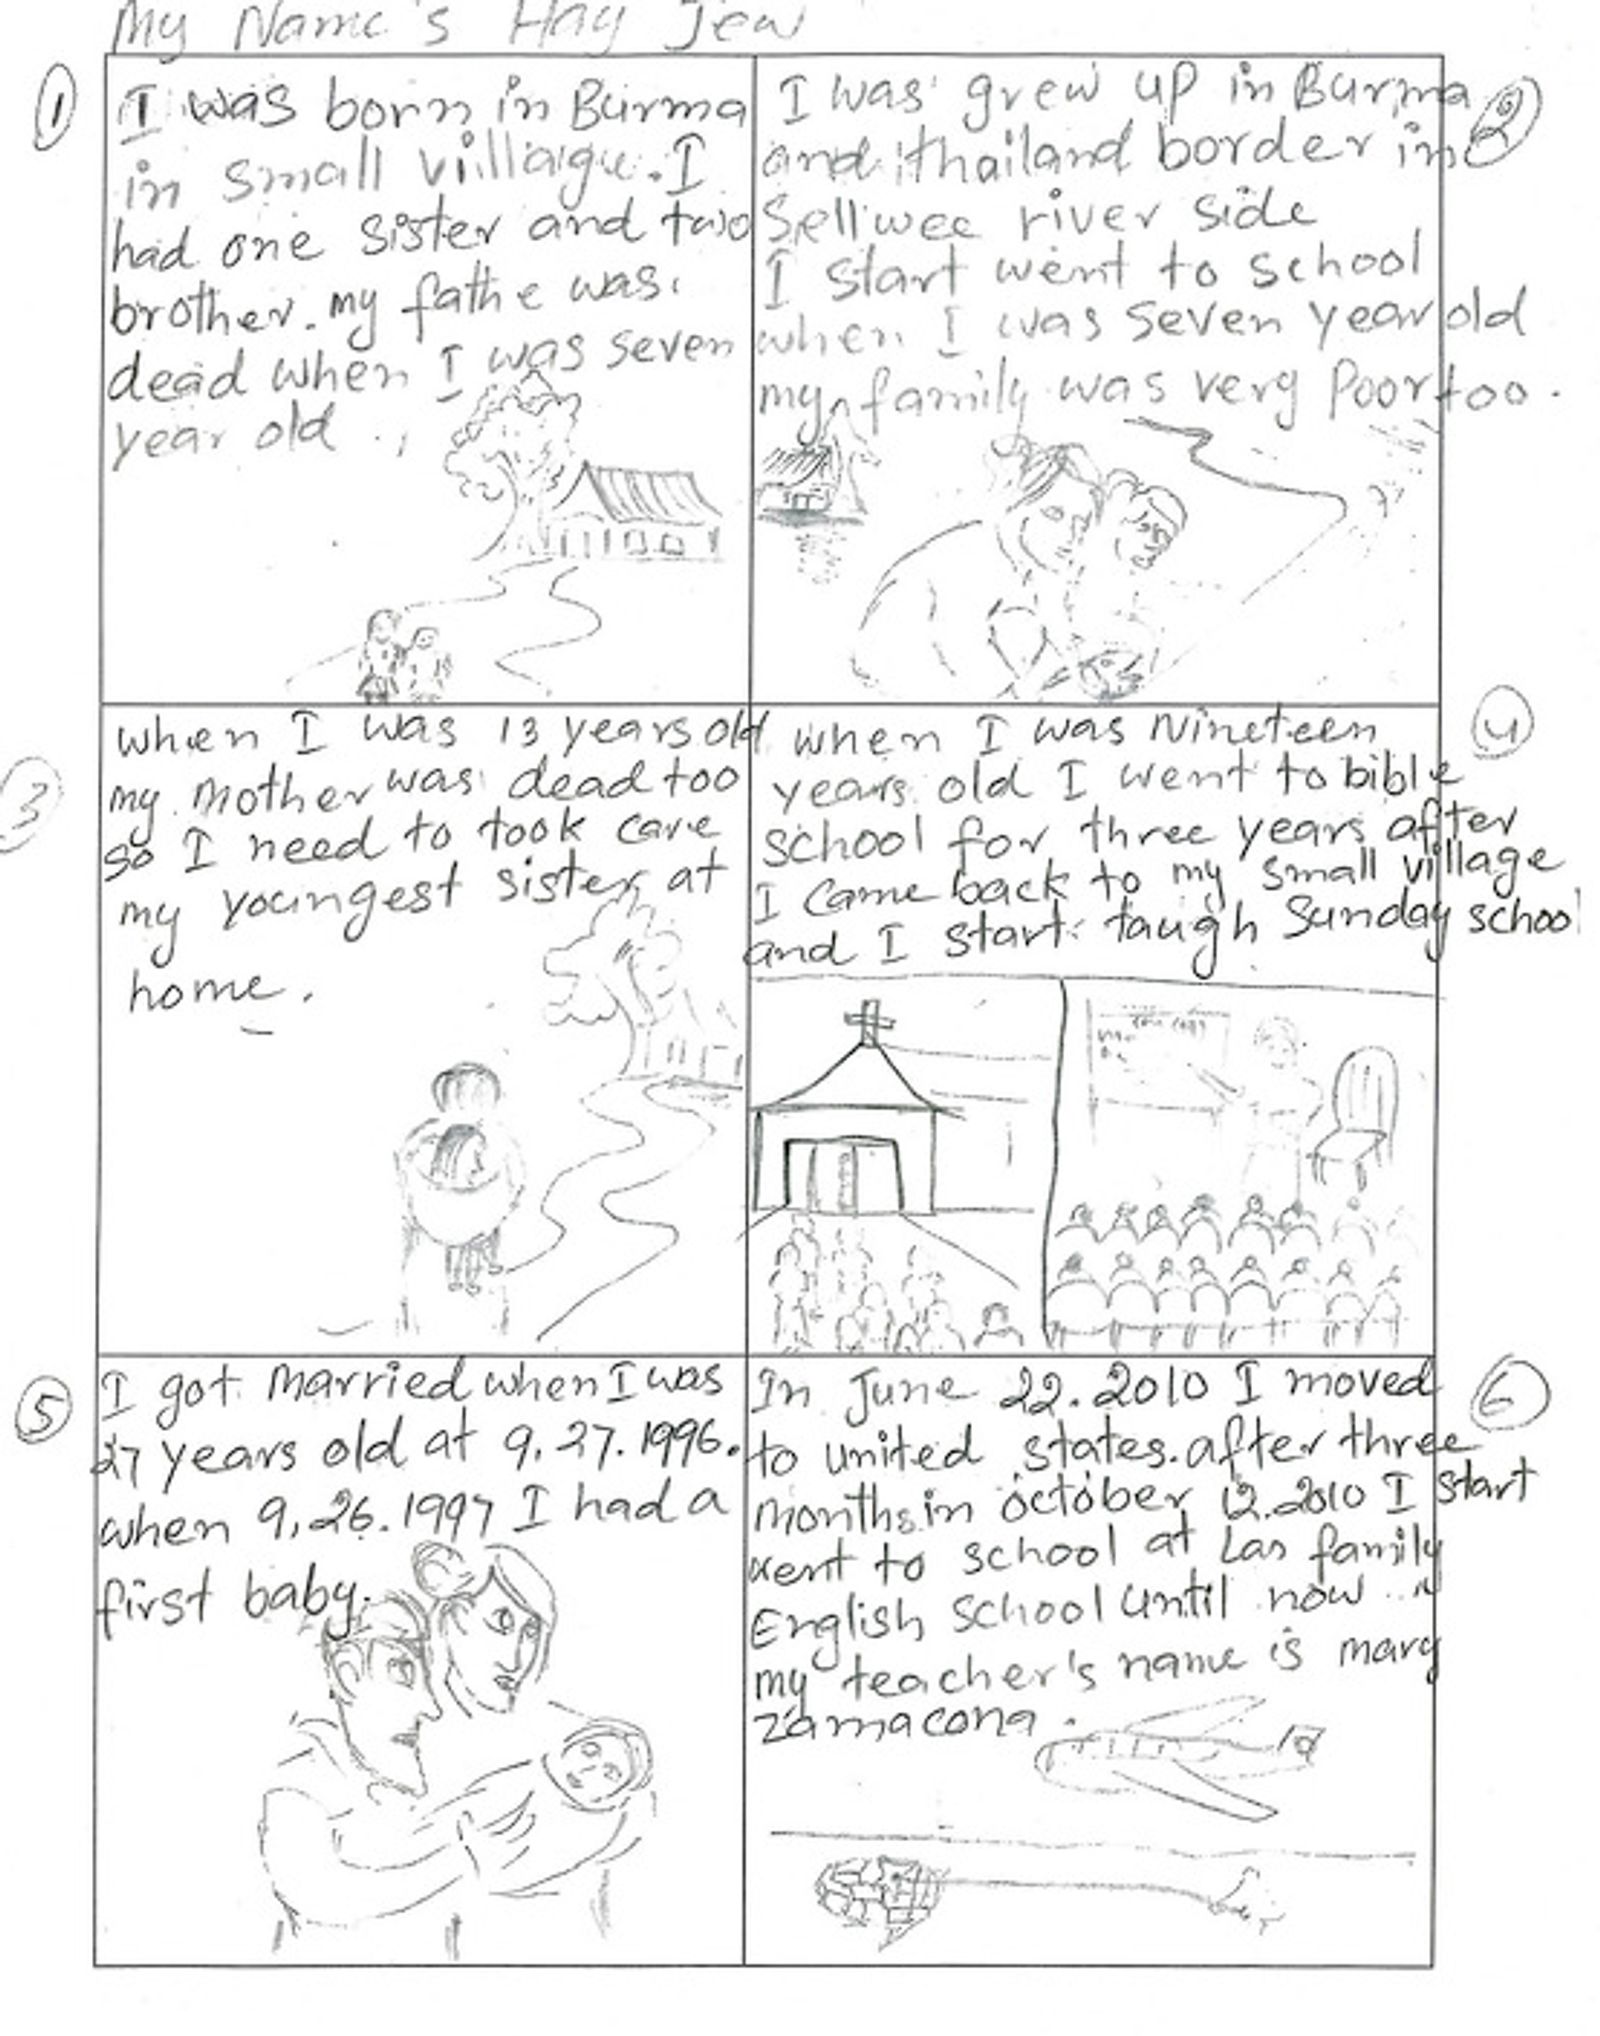 © Selma Fernandez Richter - Hay Jea from Burma created this autobiographical cartoon about his own life story.